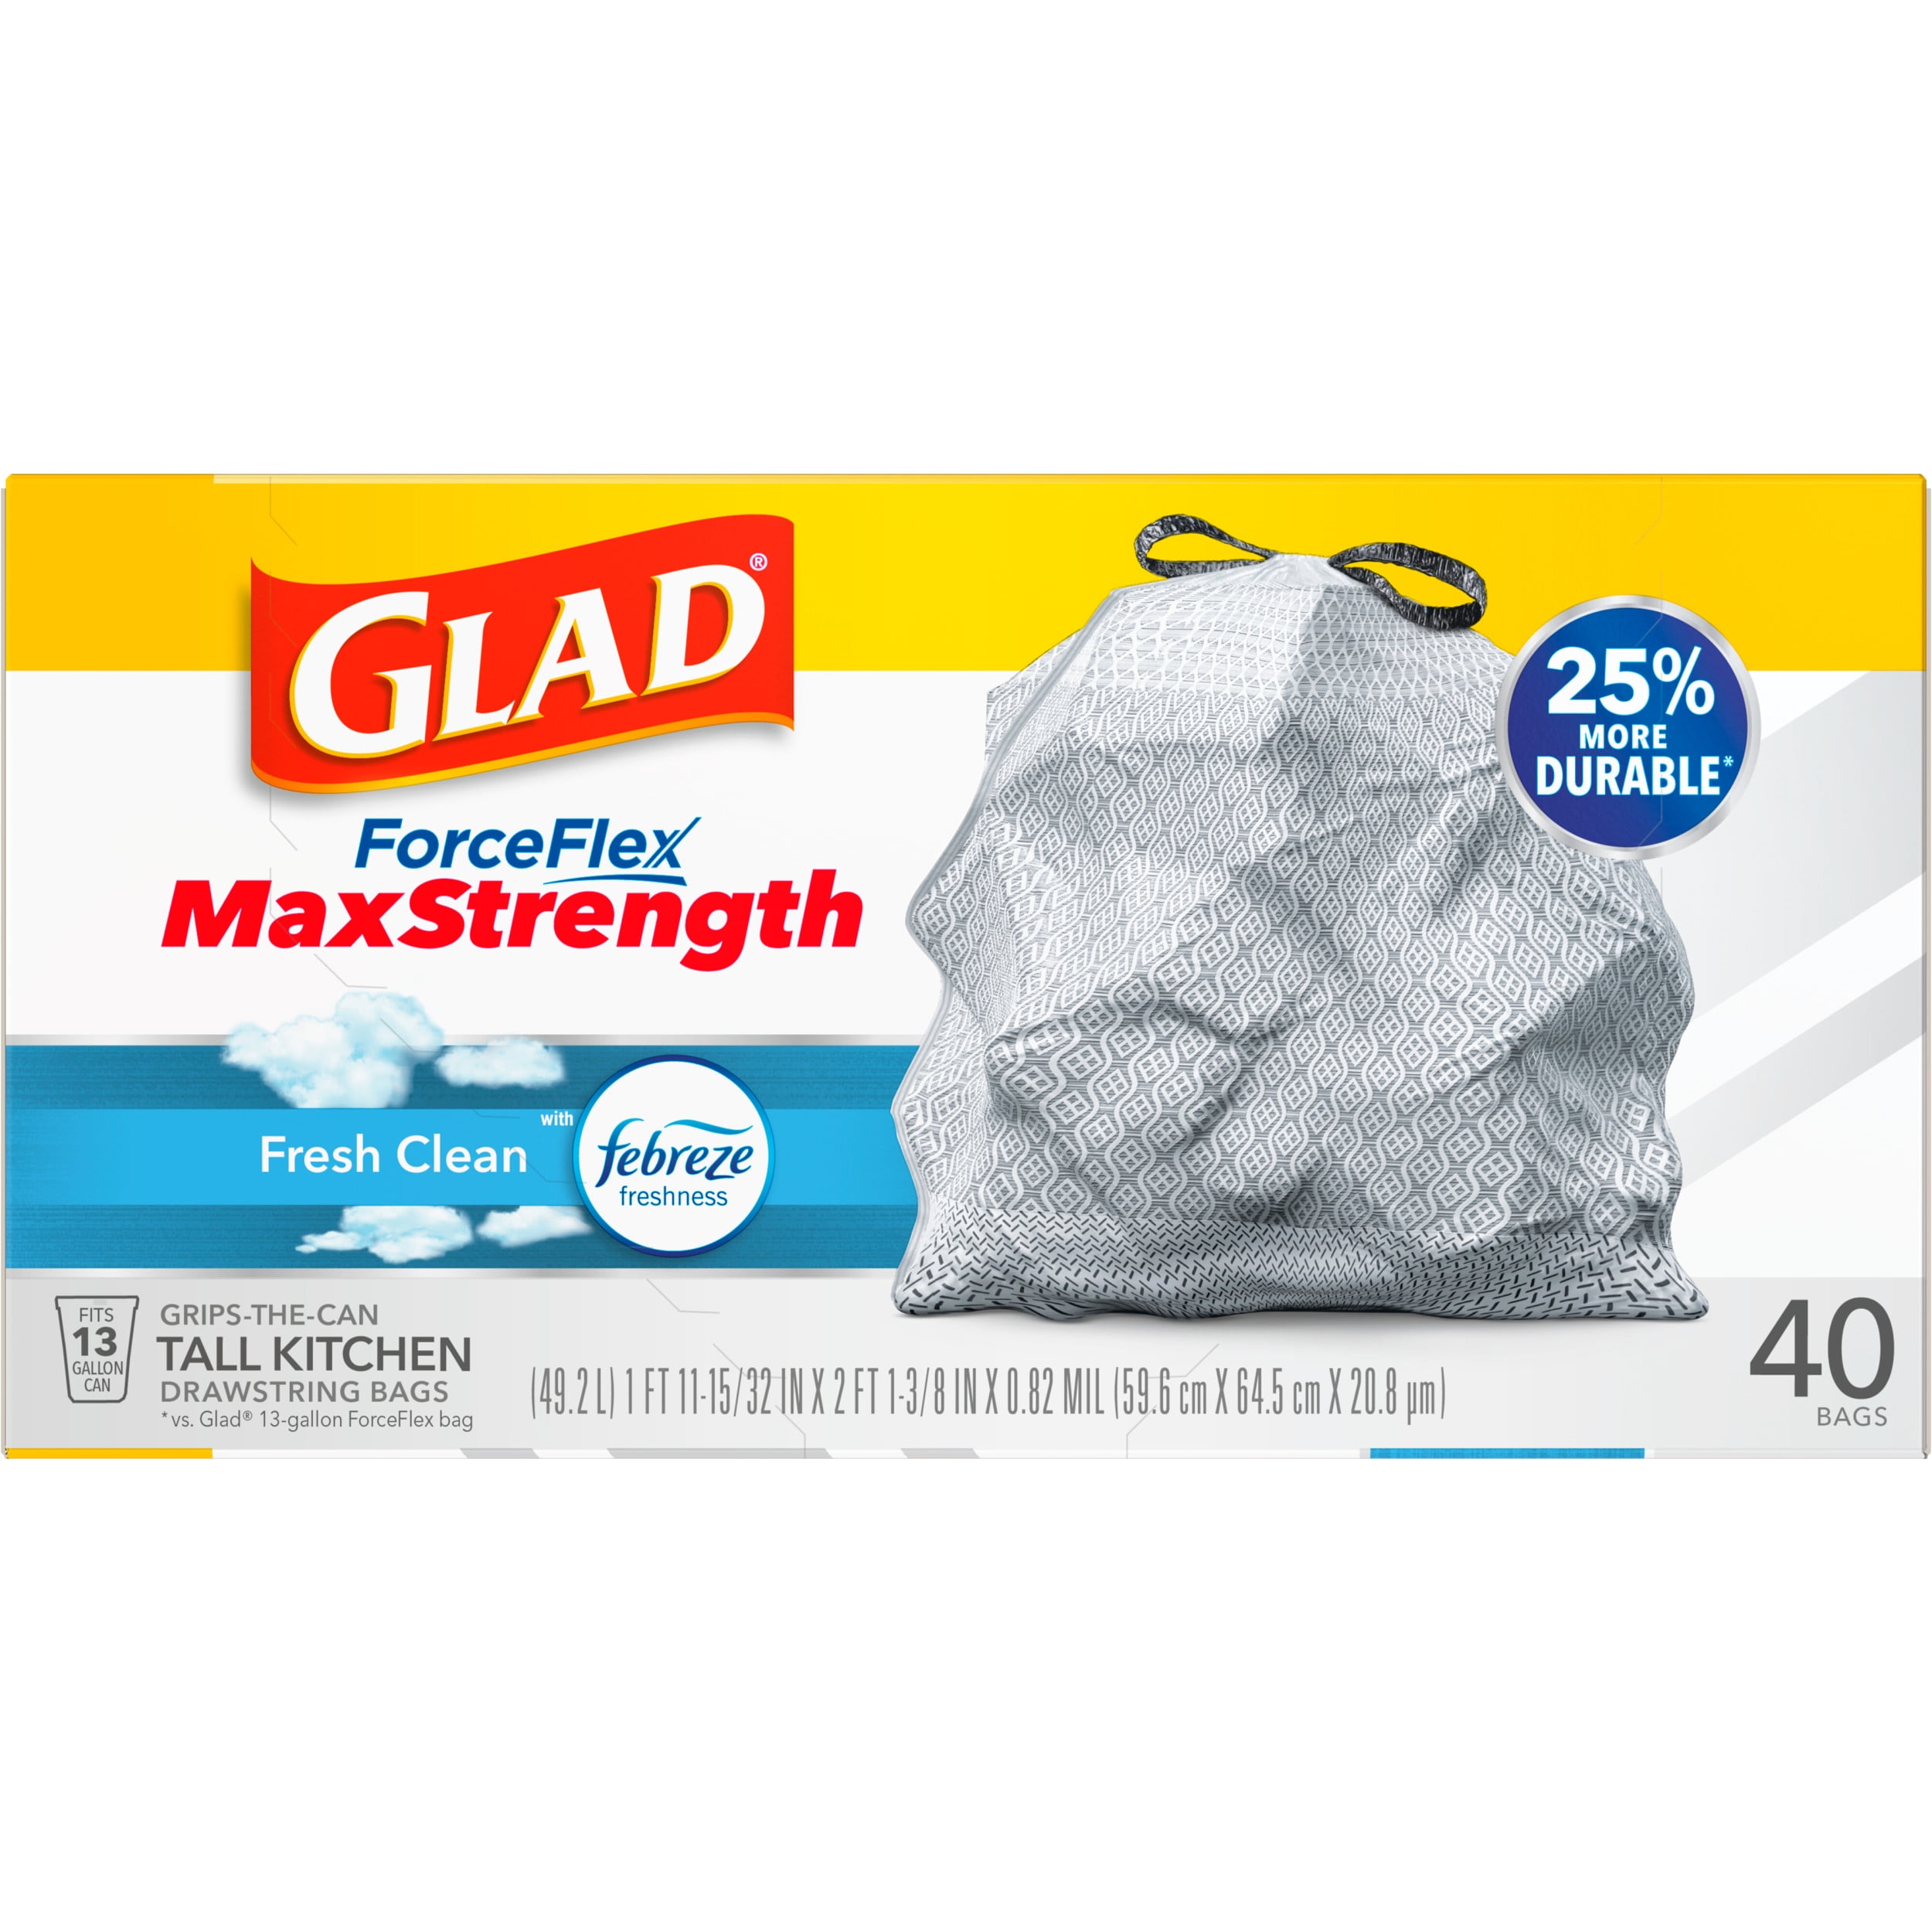 Glad ForceFlex MaxStrength with Febreze Fresh Clean Scent Extra Large  Kitchen Drawstring Trash Bags, 30 ct - Harris Teeter